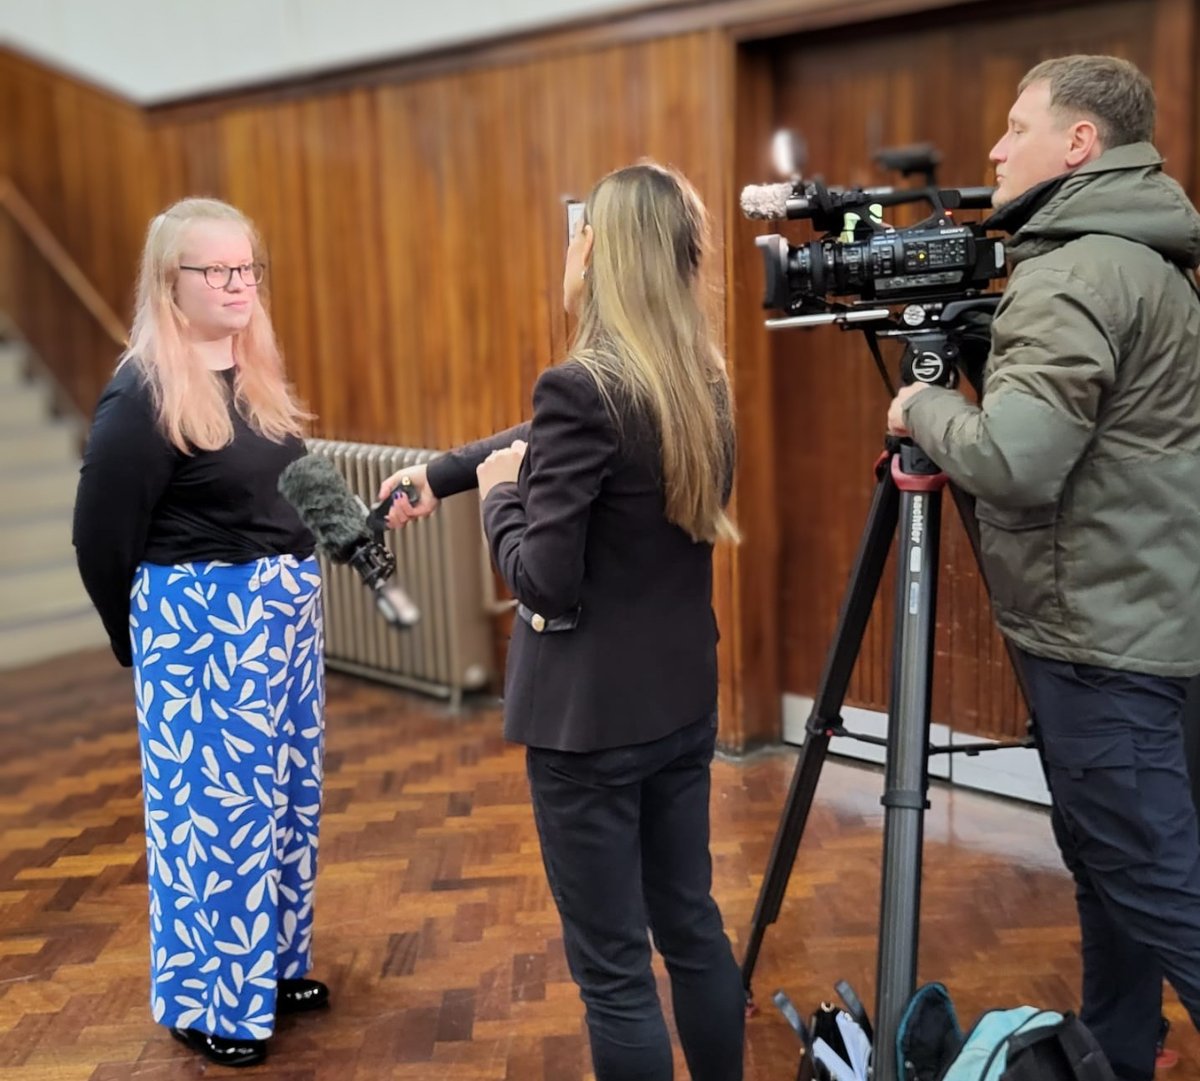 'I feel I've lost my voice in voting as a person with a disability because I can't access voting and we're not represented.' Hannah Molloy, autism consultant and spokesperson for #MyVoteMyVoice, speaks to BBC Northwest at #MyVoteMatters accessible hustings in Manchester.